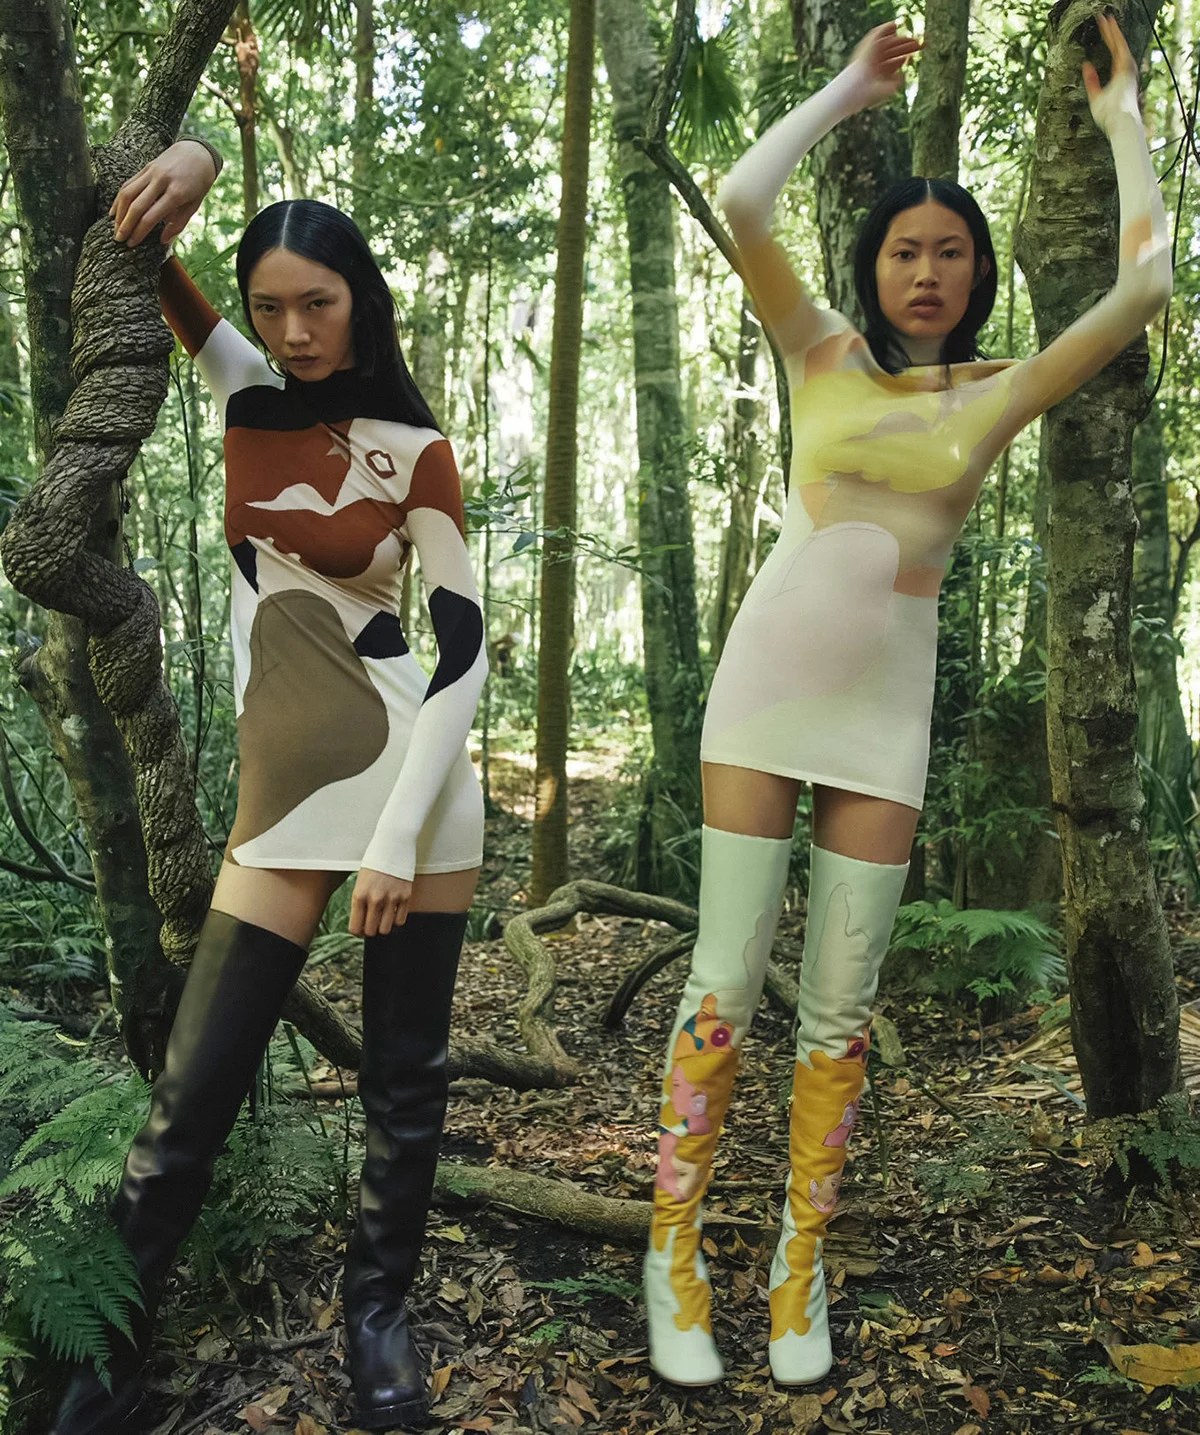 Ploy Rida and Yixin Zhao by Charles Dennington for Vogue Australia March 2022